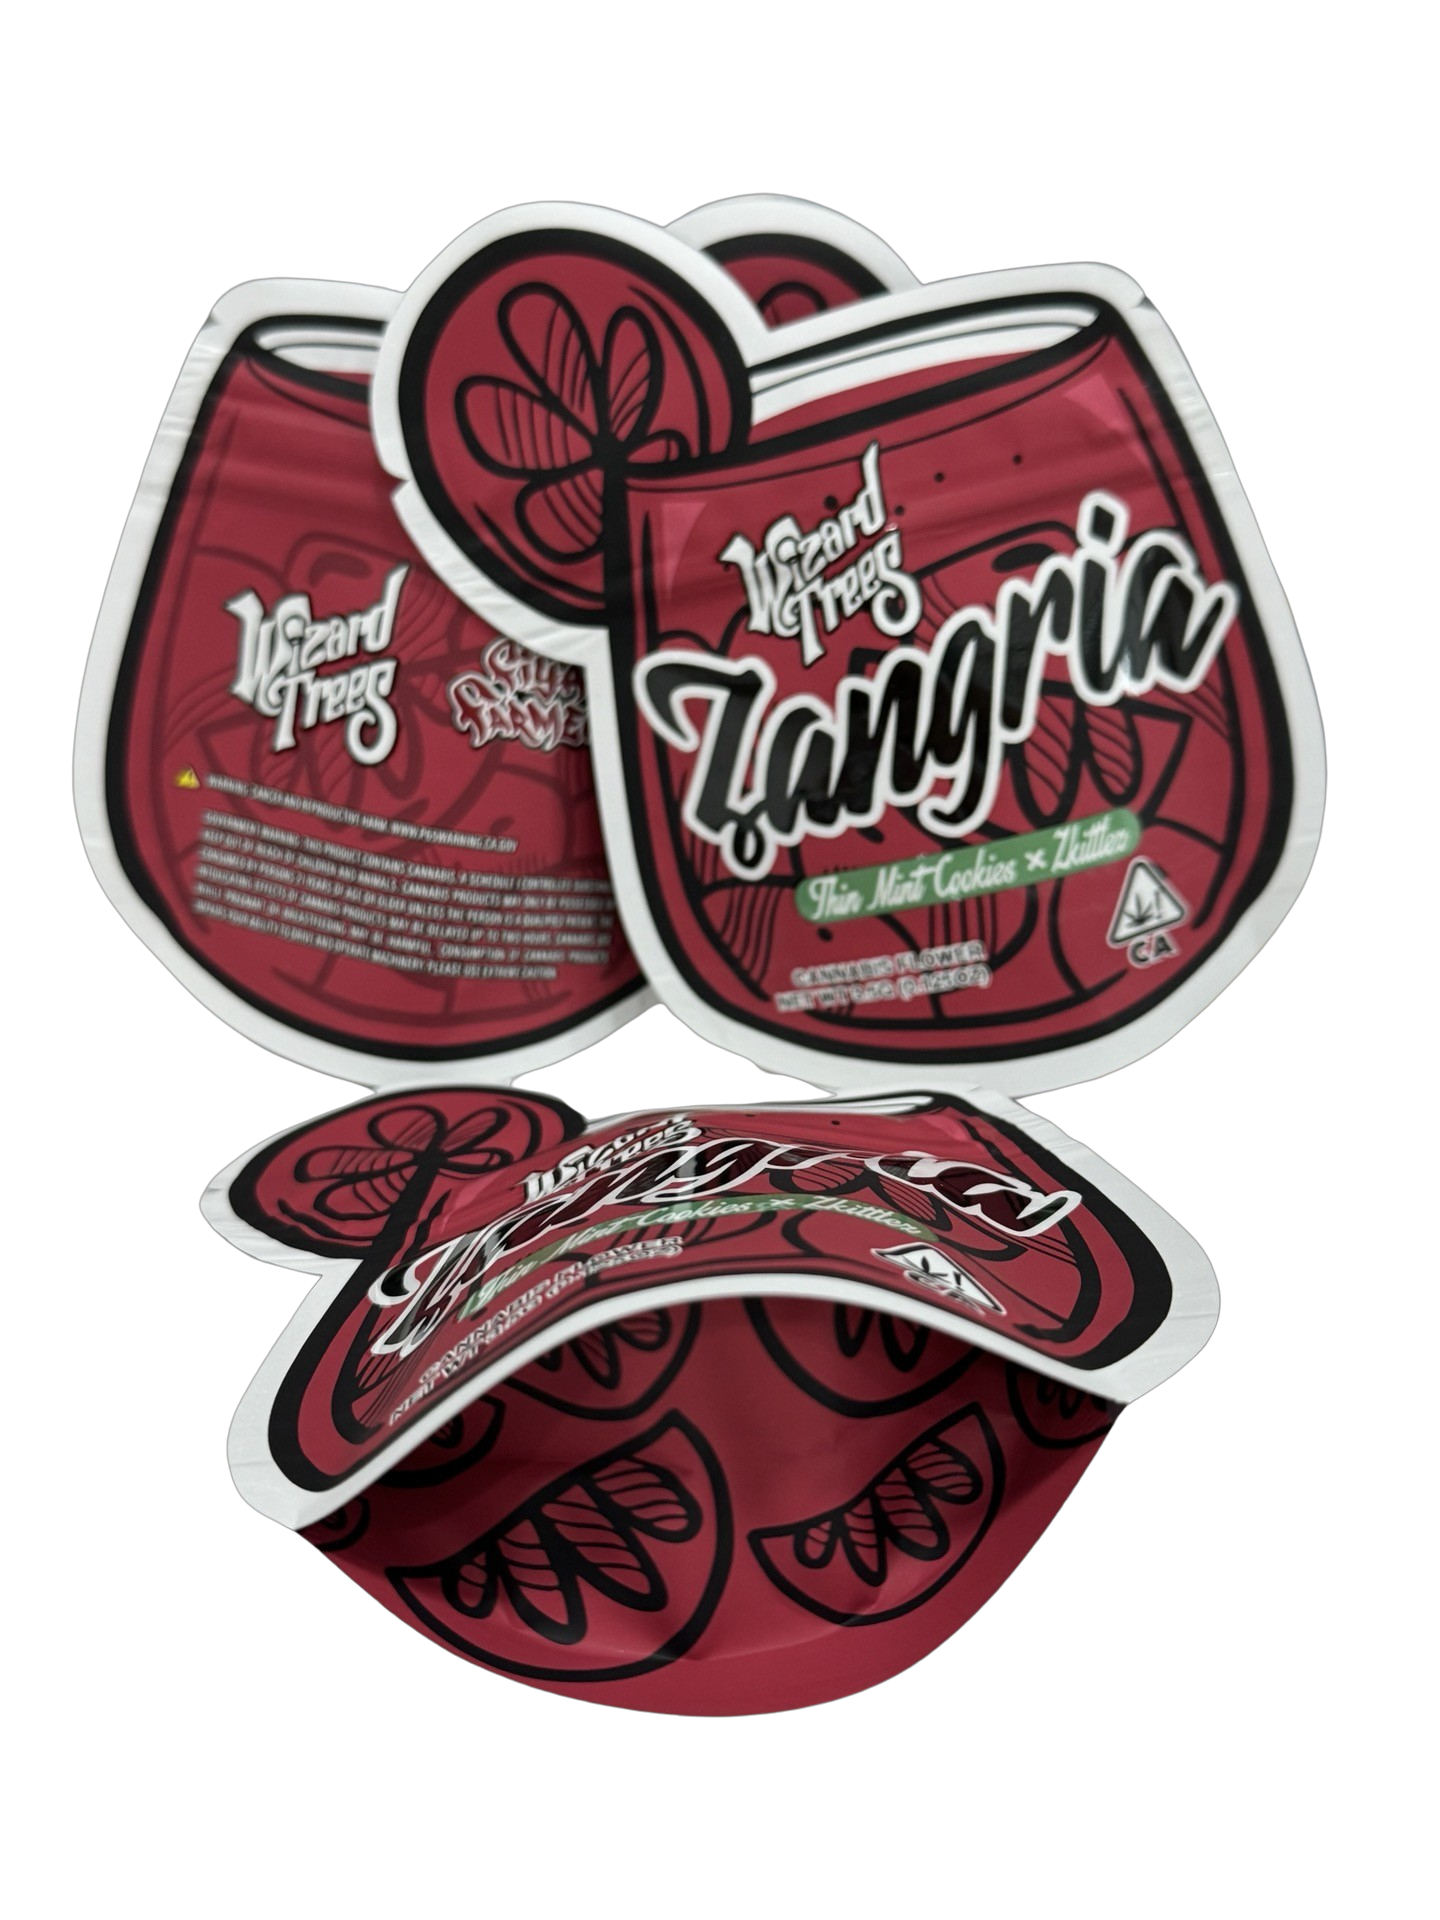 Sangria Mylar Bags 3.5g Wizard of Trees